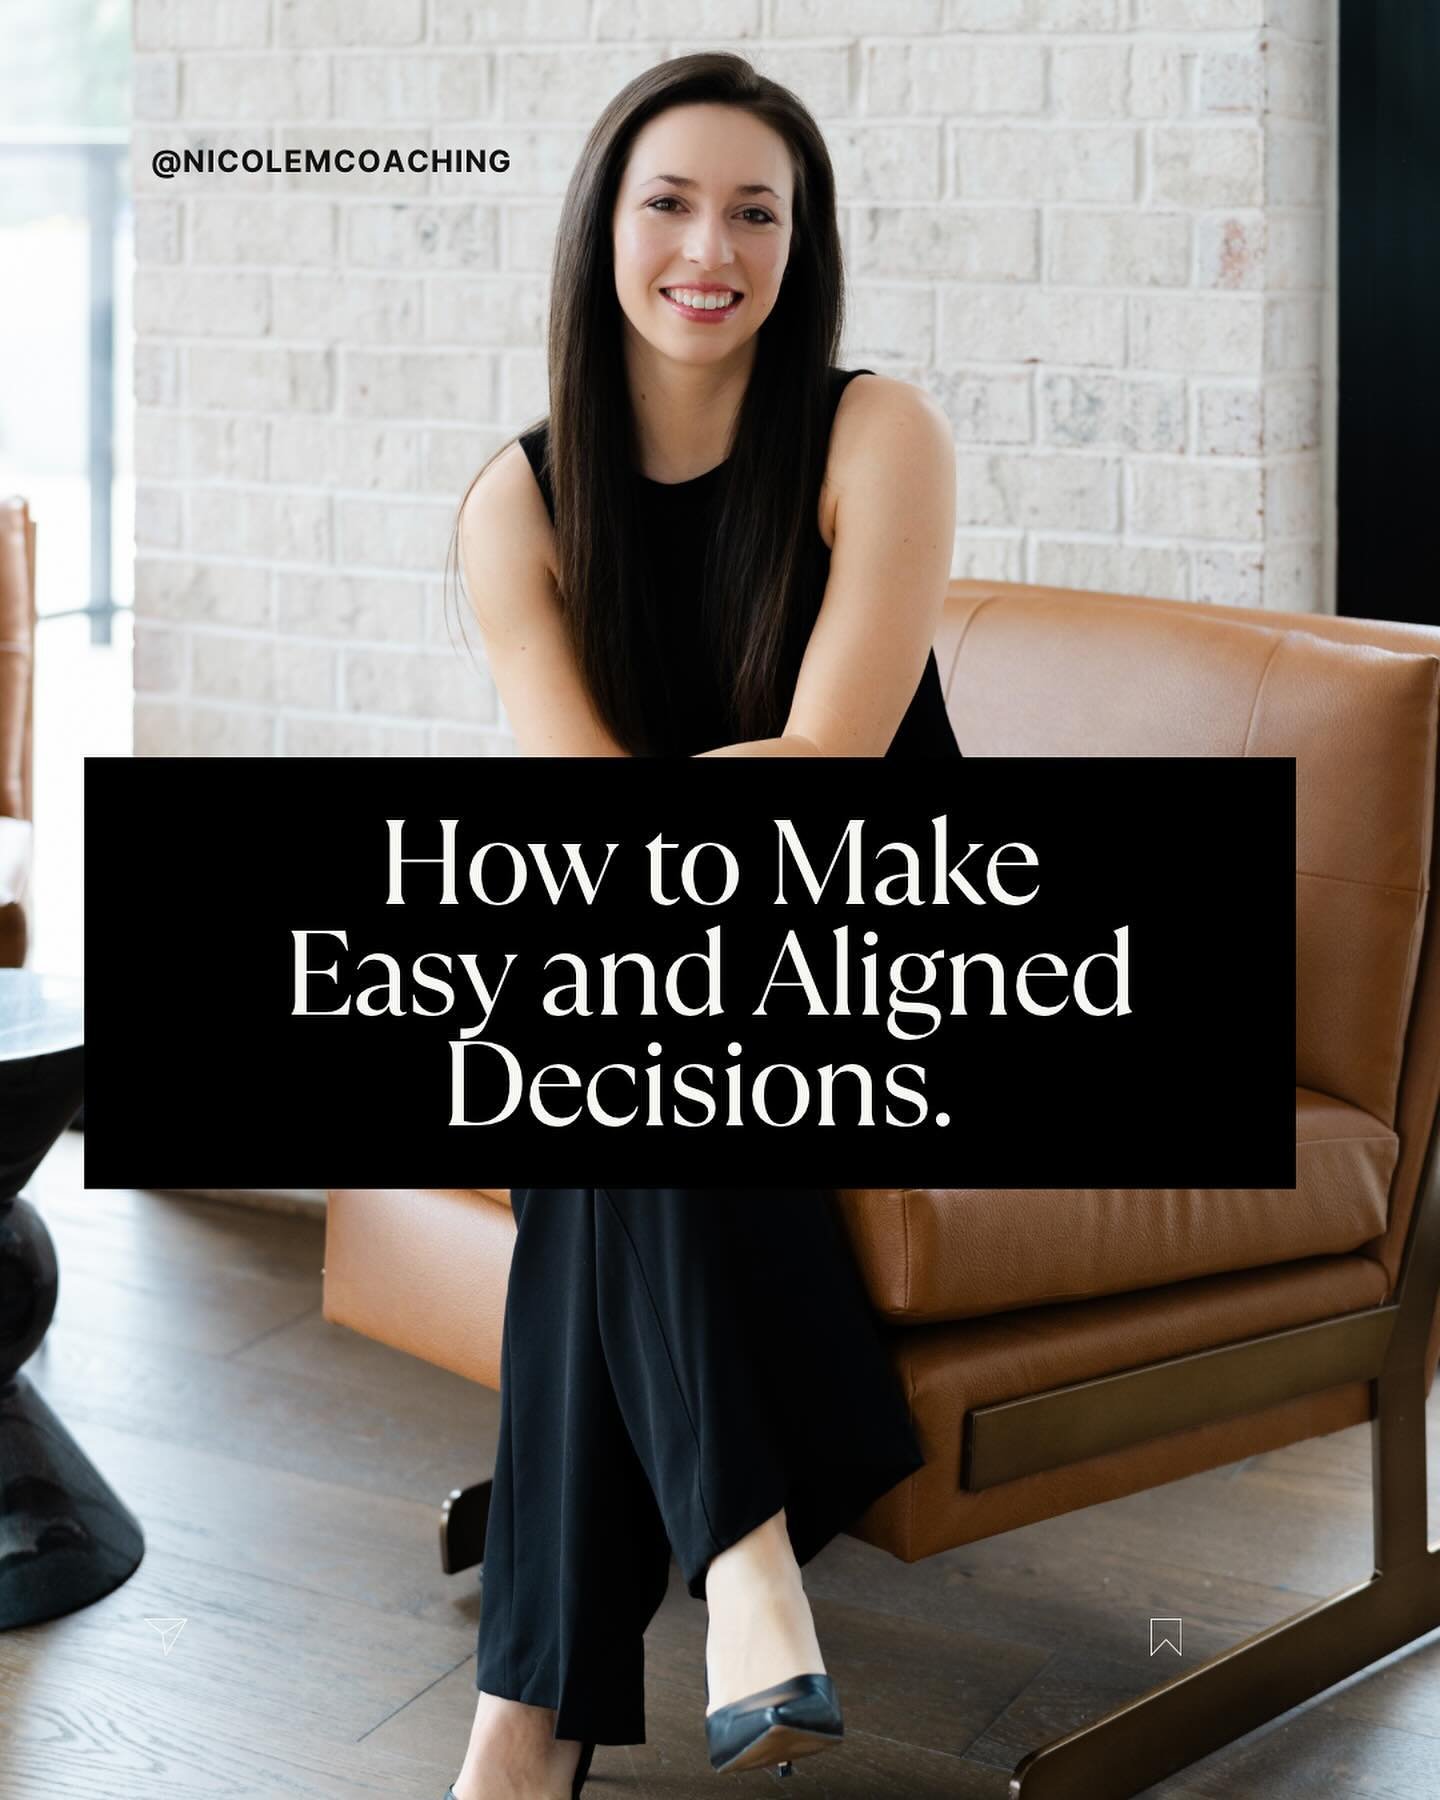 Decision fatigue is a real thing. 

Which makes finding ways to make decisions easily that are in alignment with your values and goals all the more important. 

I help my clients learn to build confidence in their decision making abilities no matter 